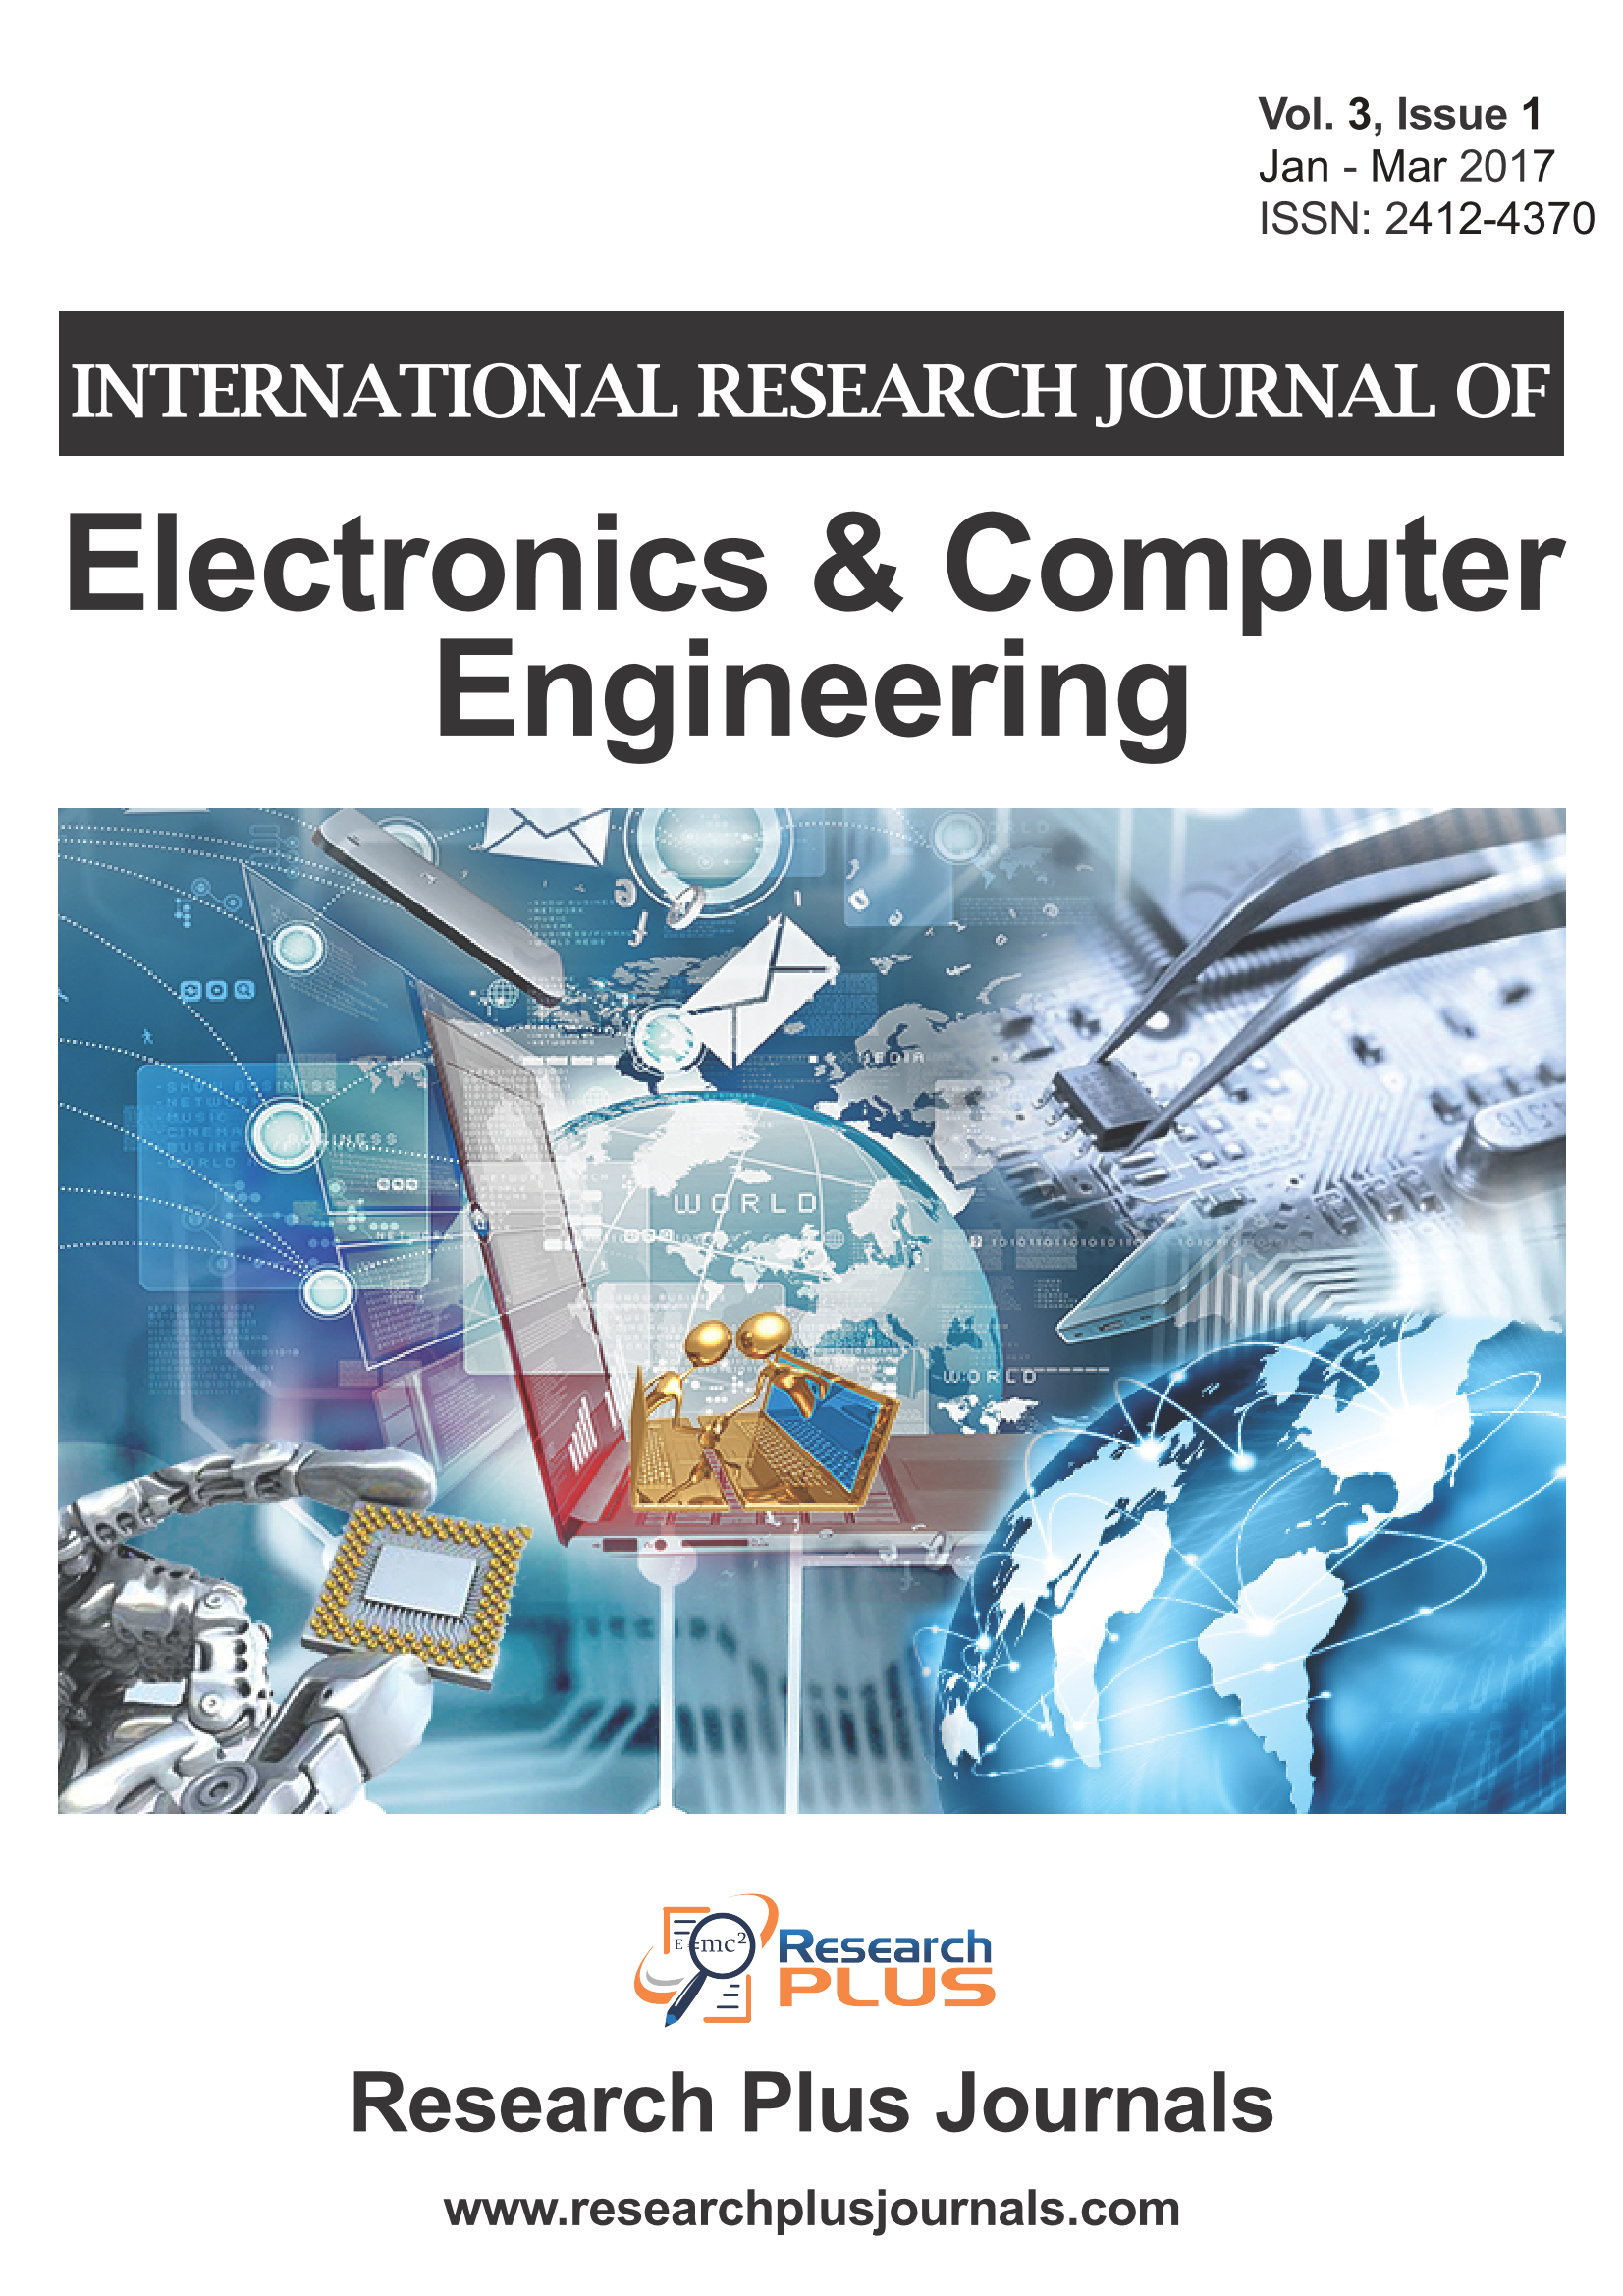 International Research Journal of Electronics & Computer Engineering (ISSN Online: 2412-4370)